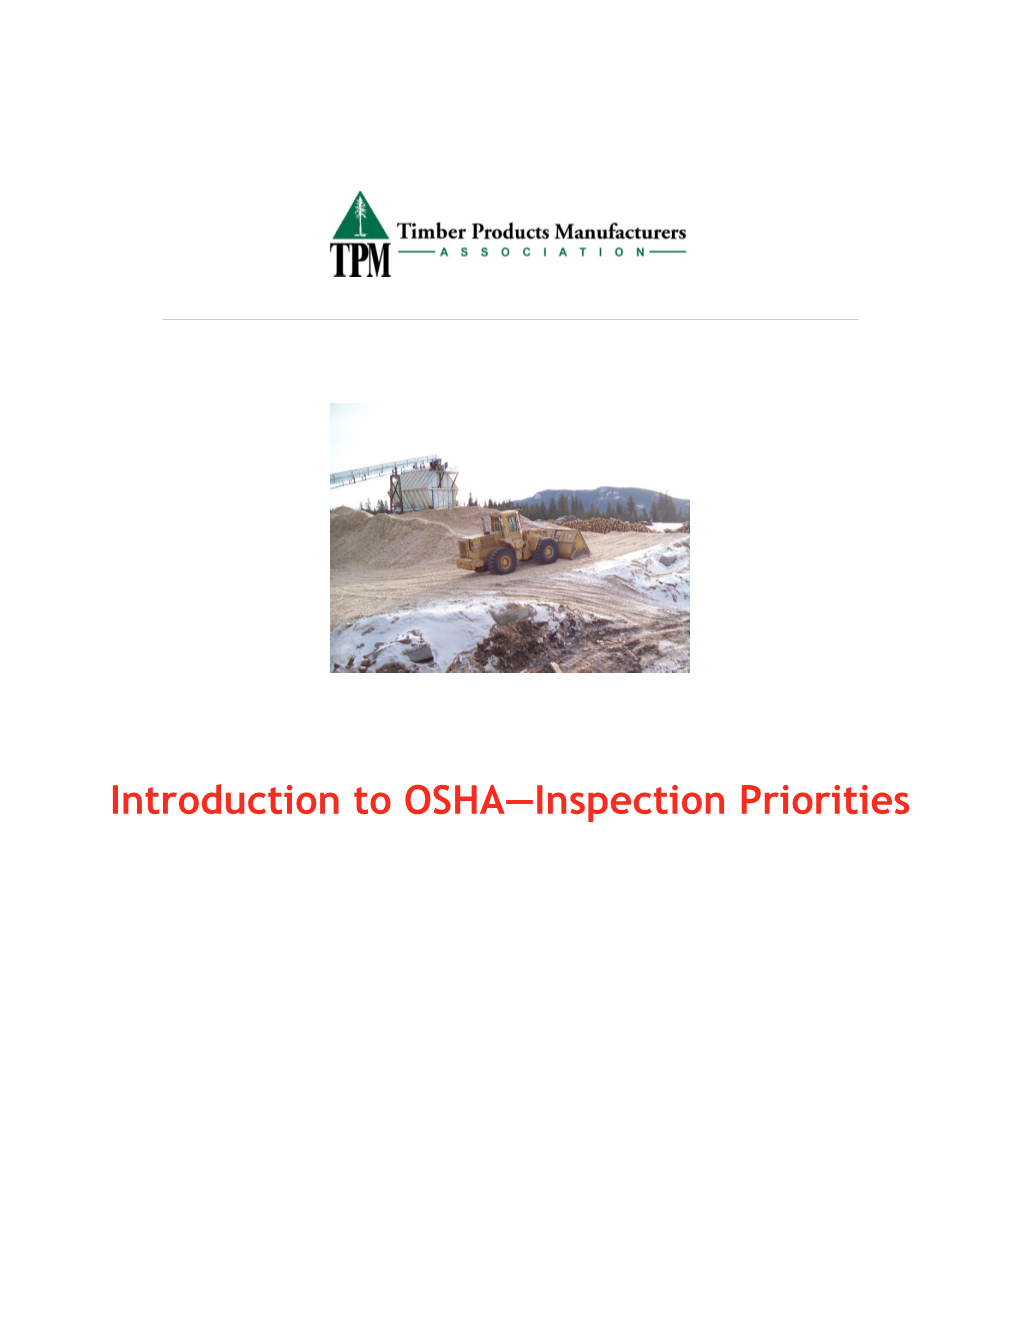 Introduction to OSHA Inspection Priorities